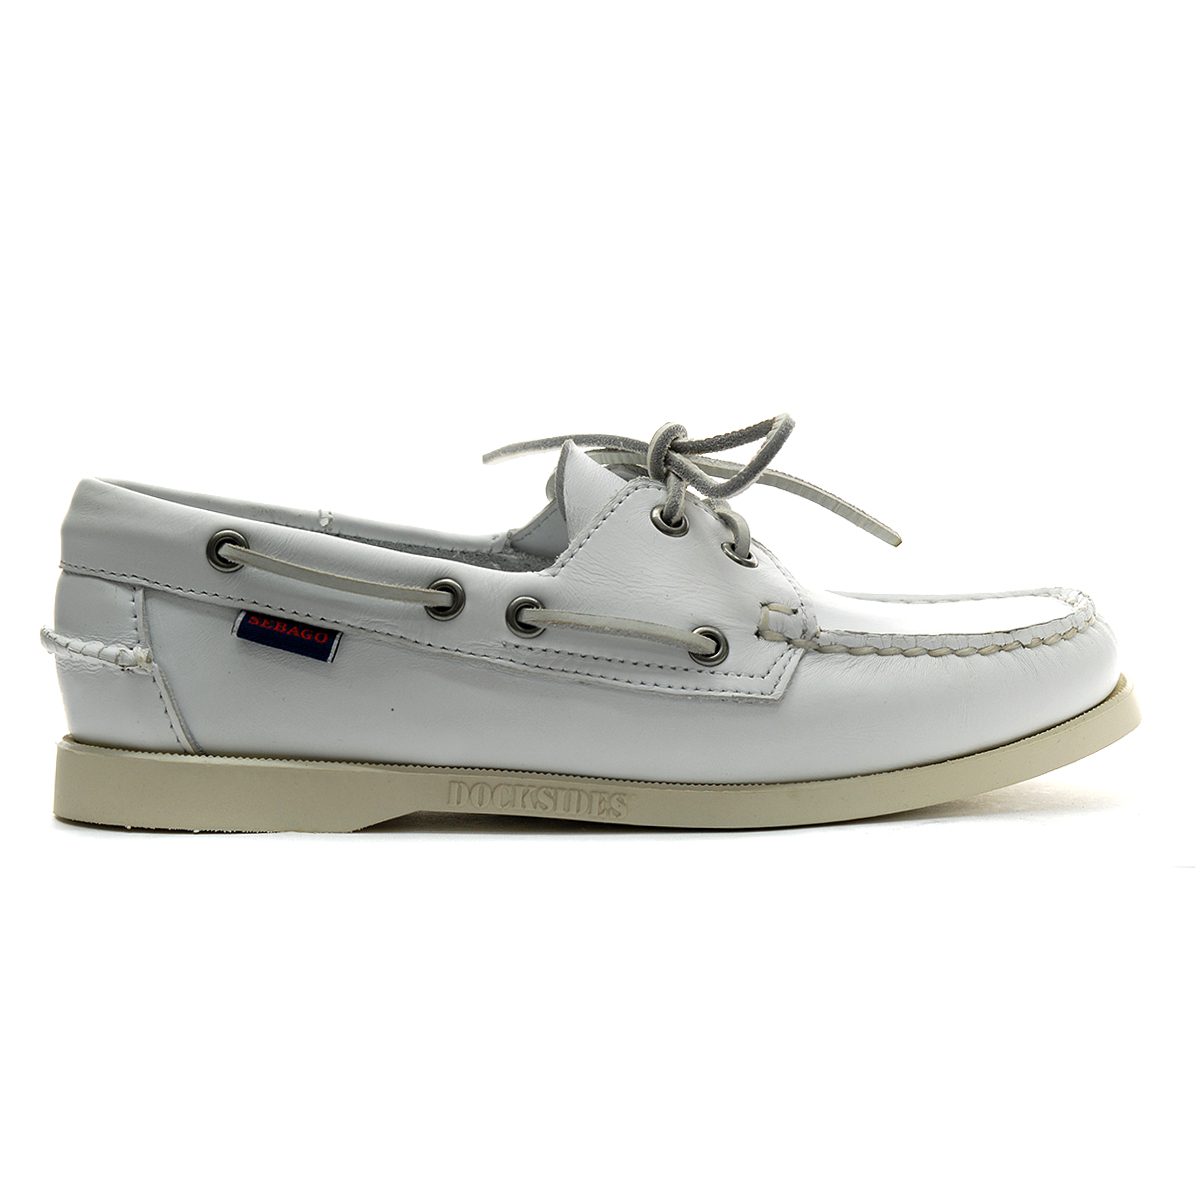 white boat shoes